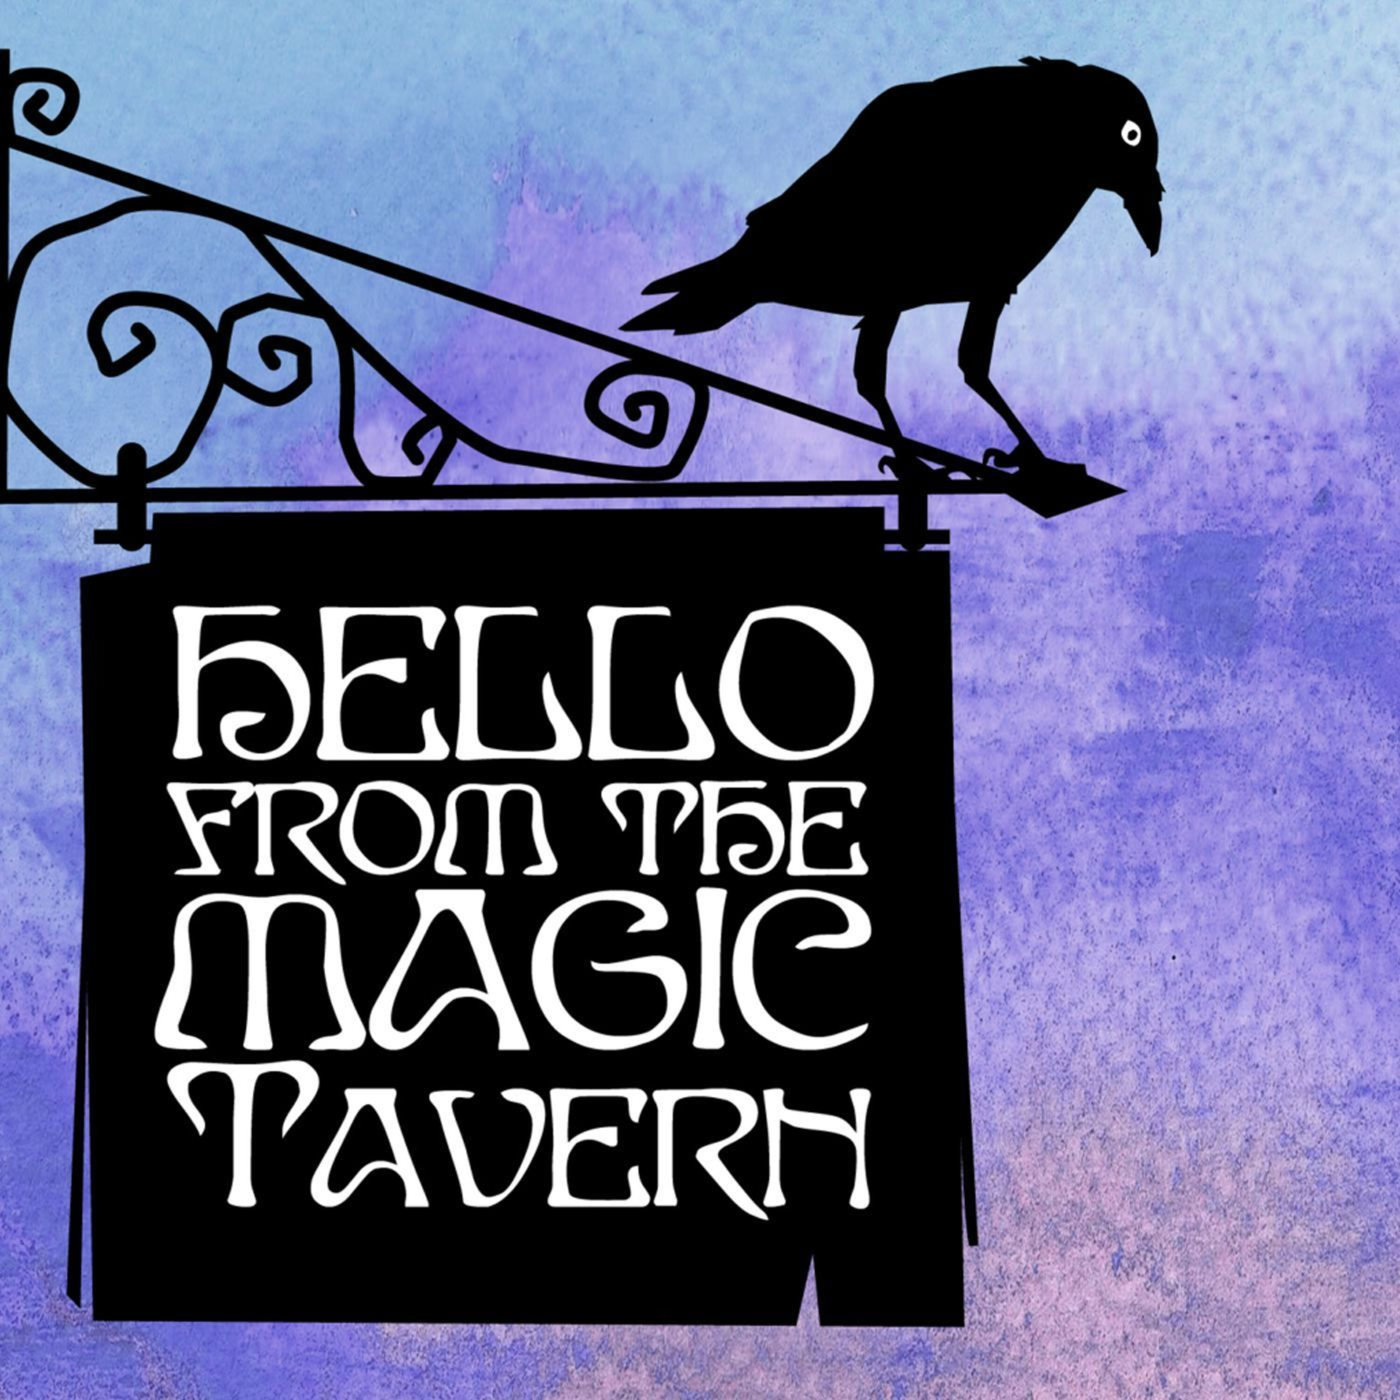 "Hello From The Magic Tavern" Podcast